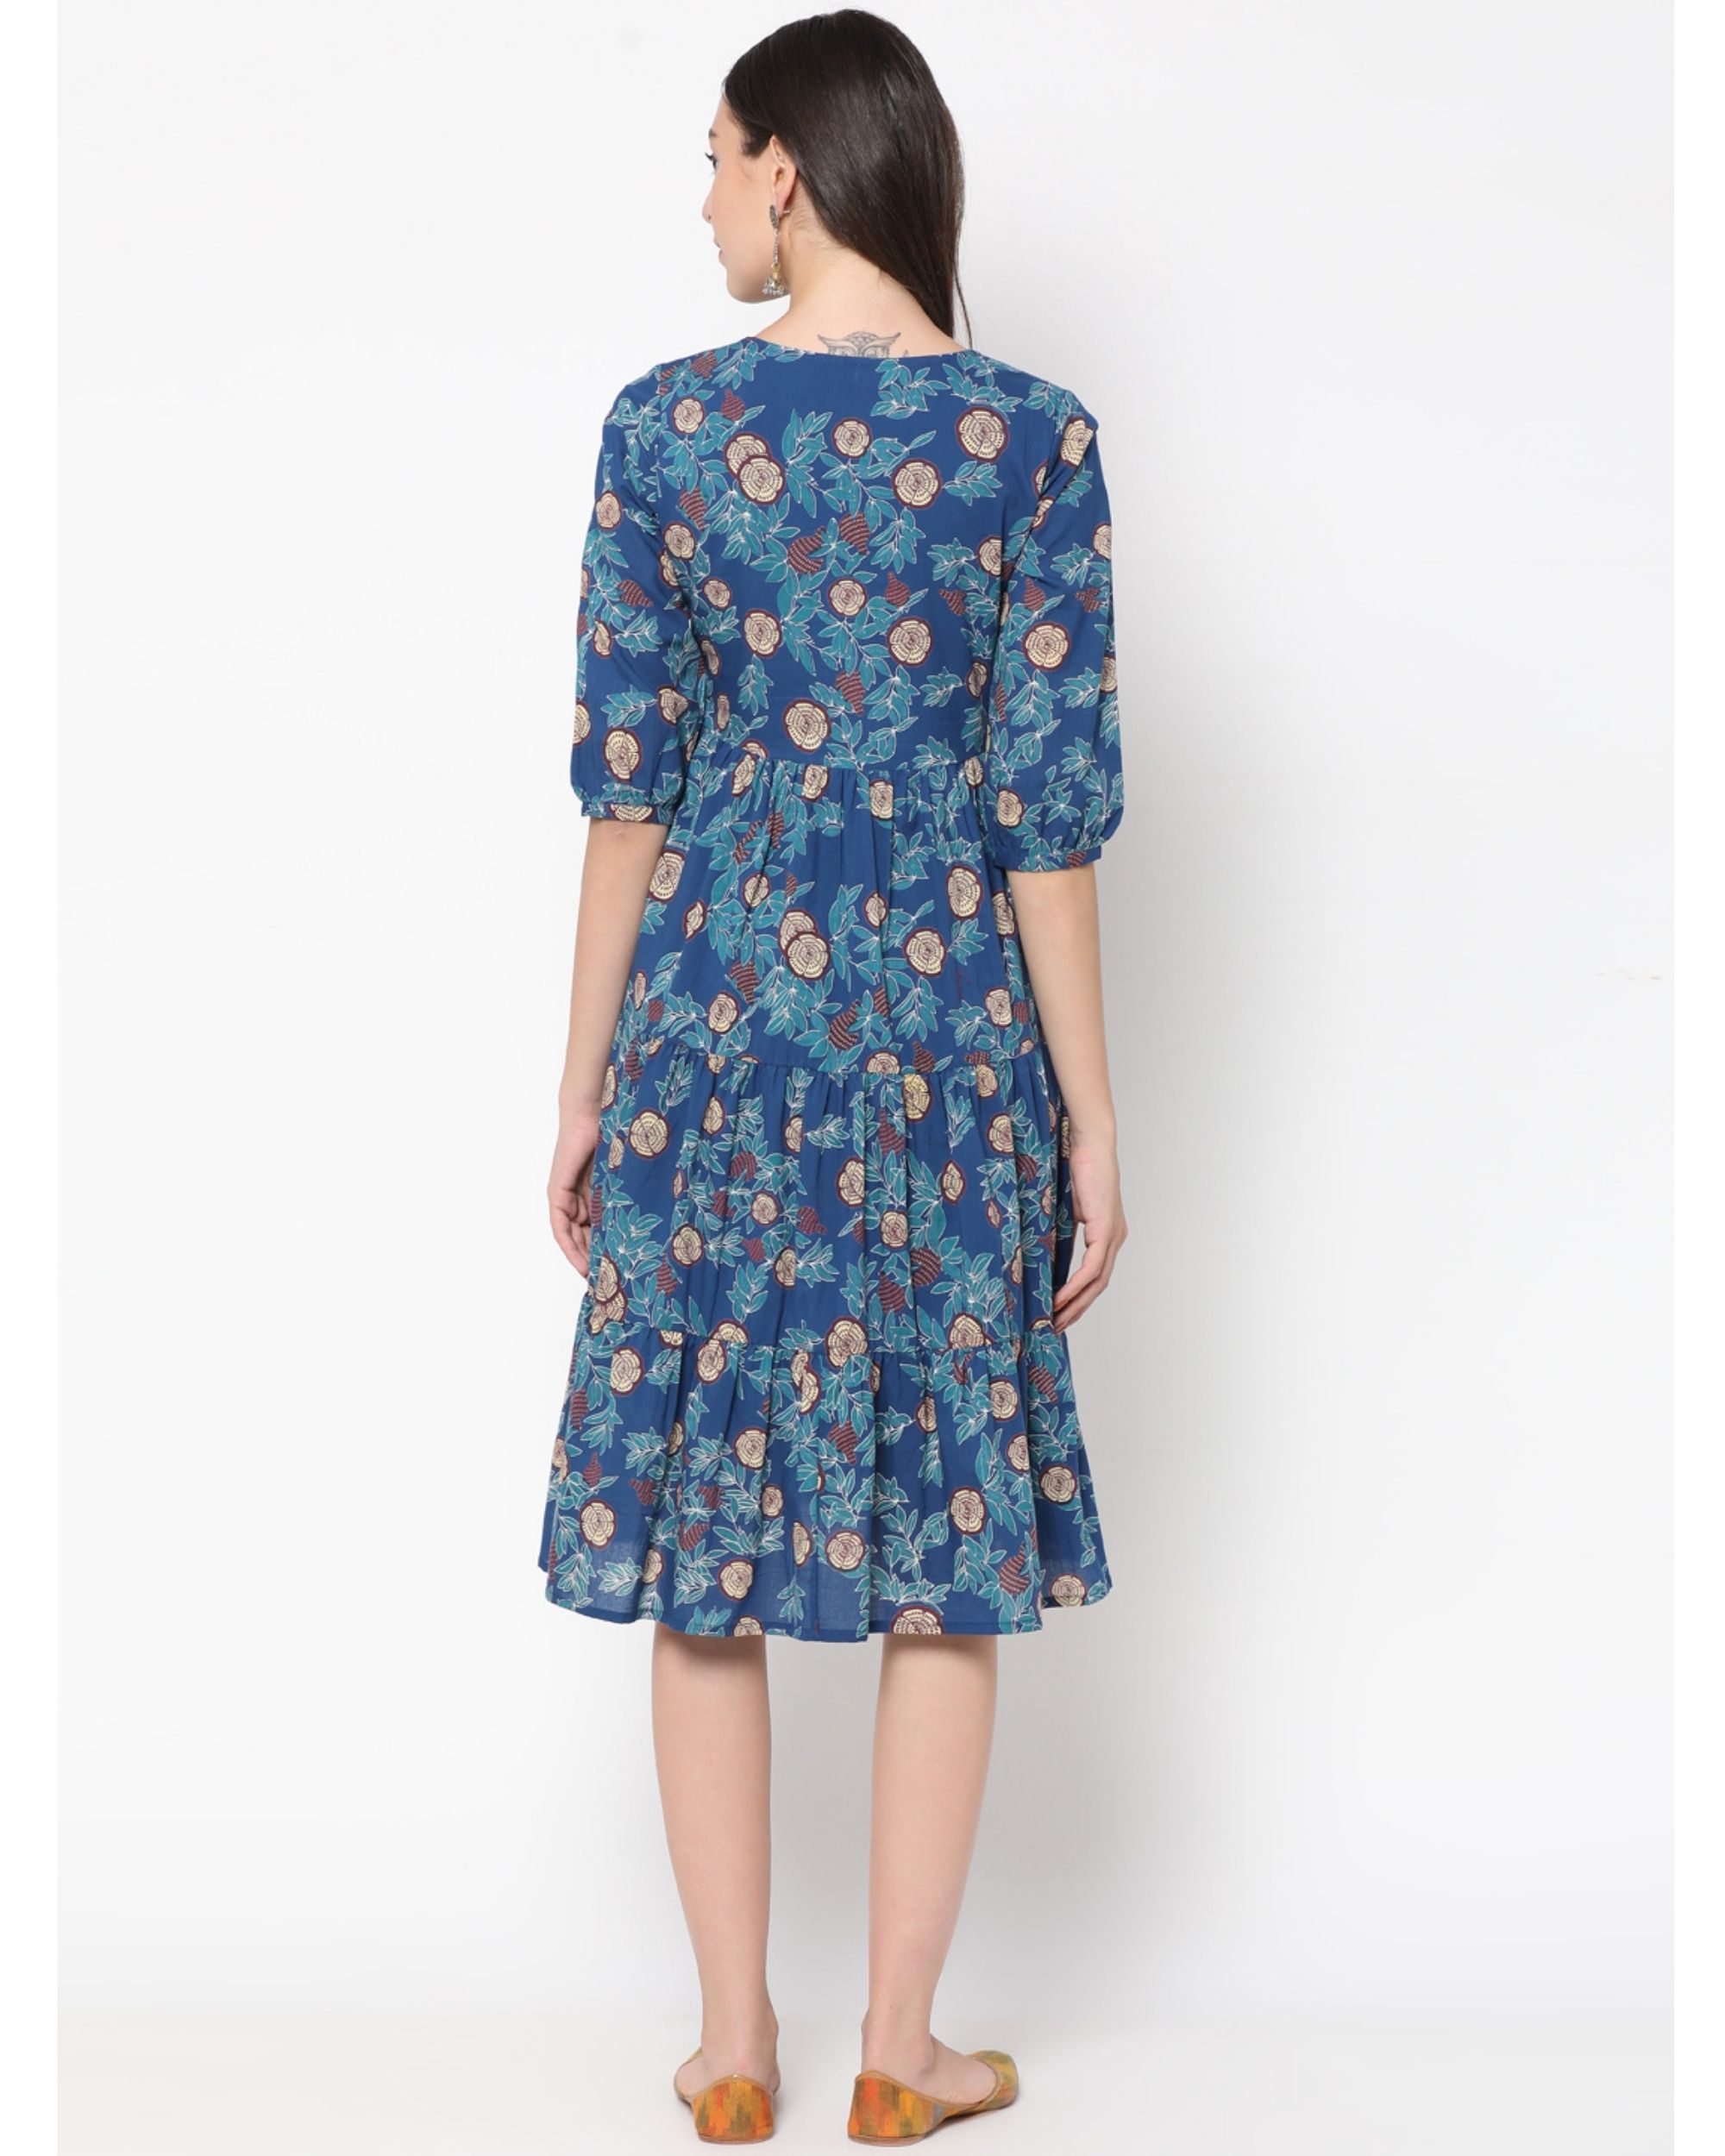 Blue floral printed tiered dress by UNTUNG | The Secret Label